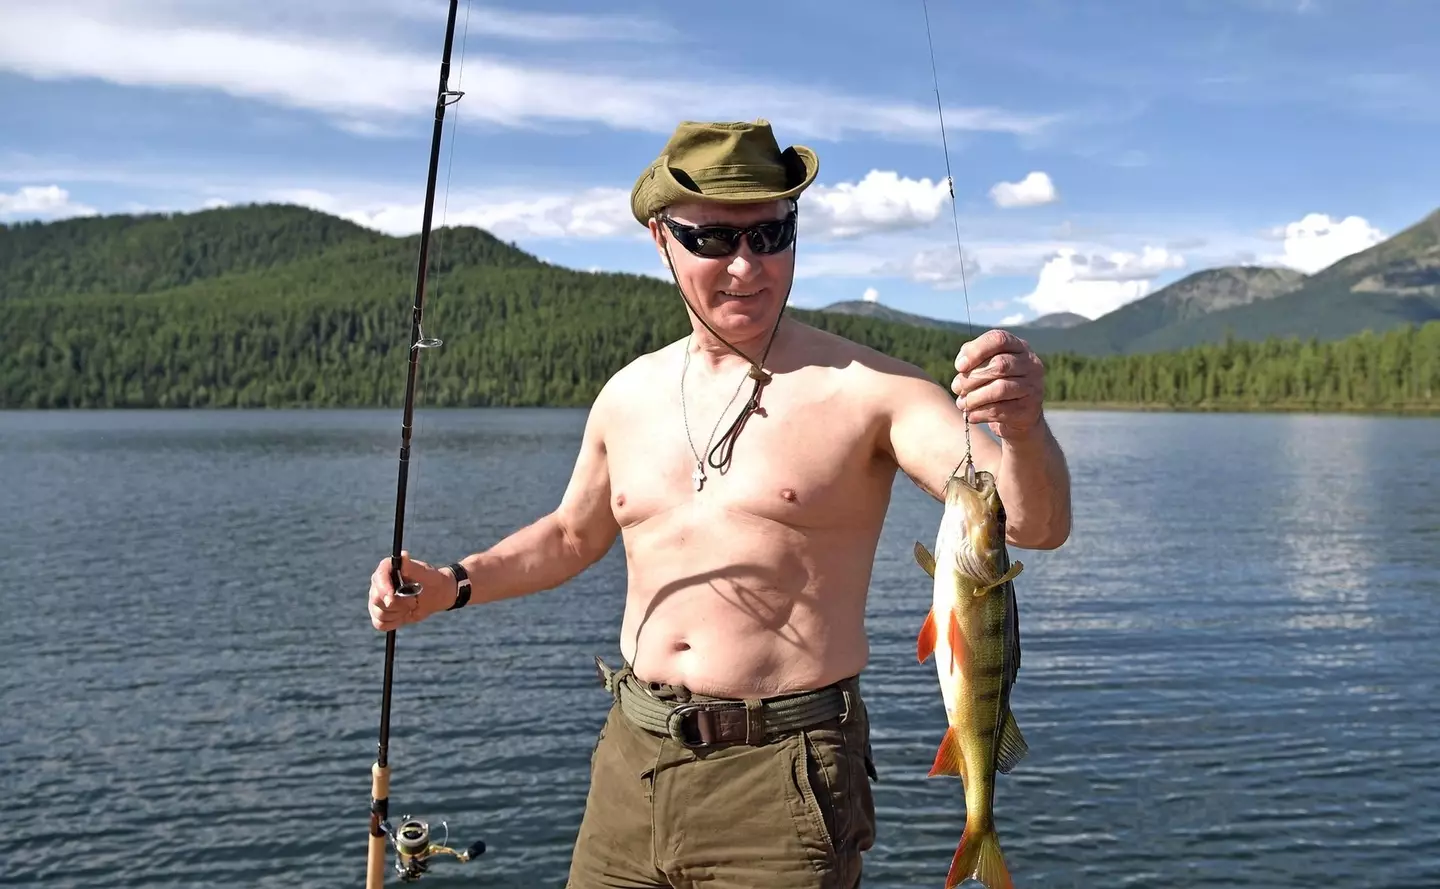 Putin says he sees no problem with being photographed topless.